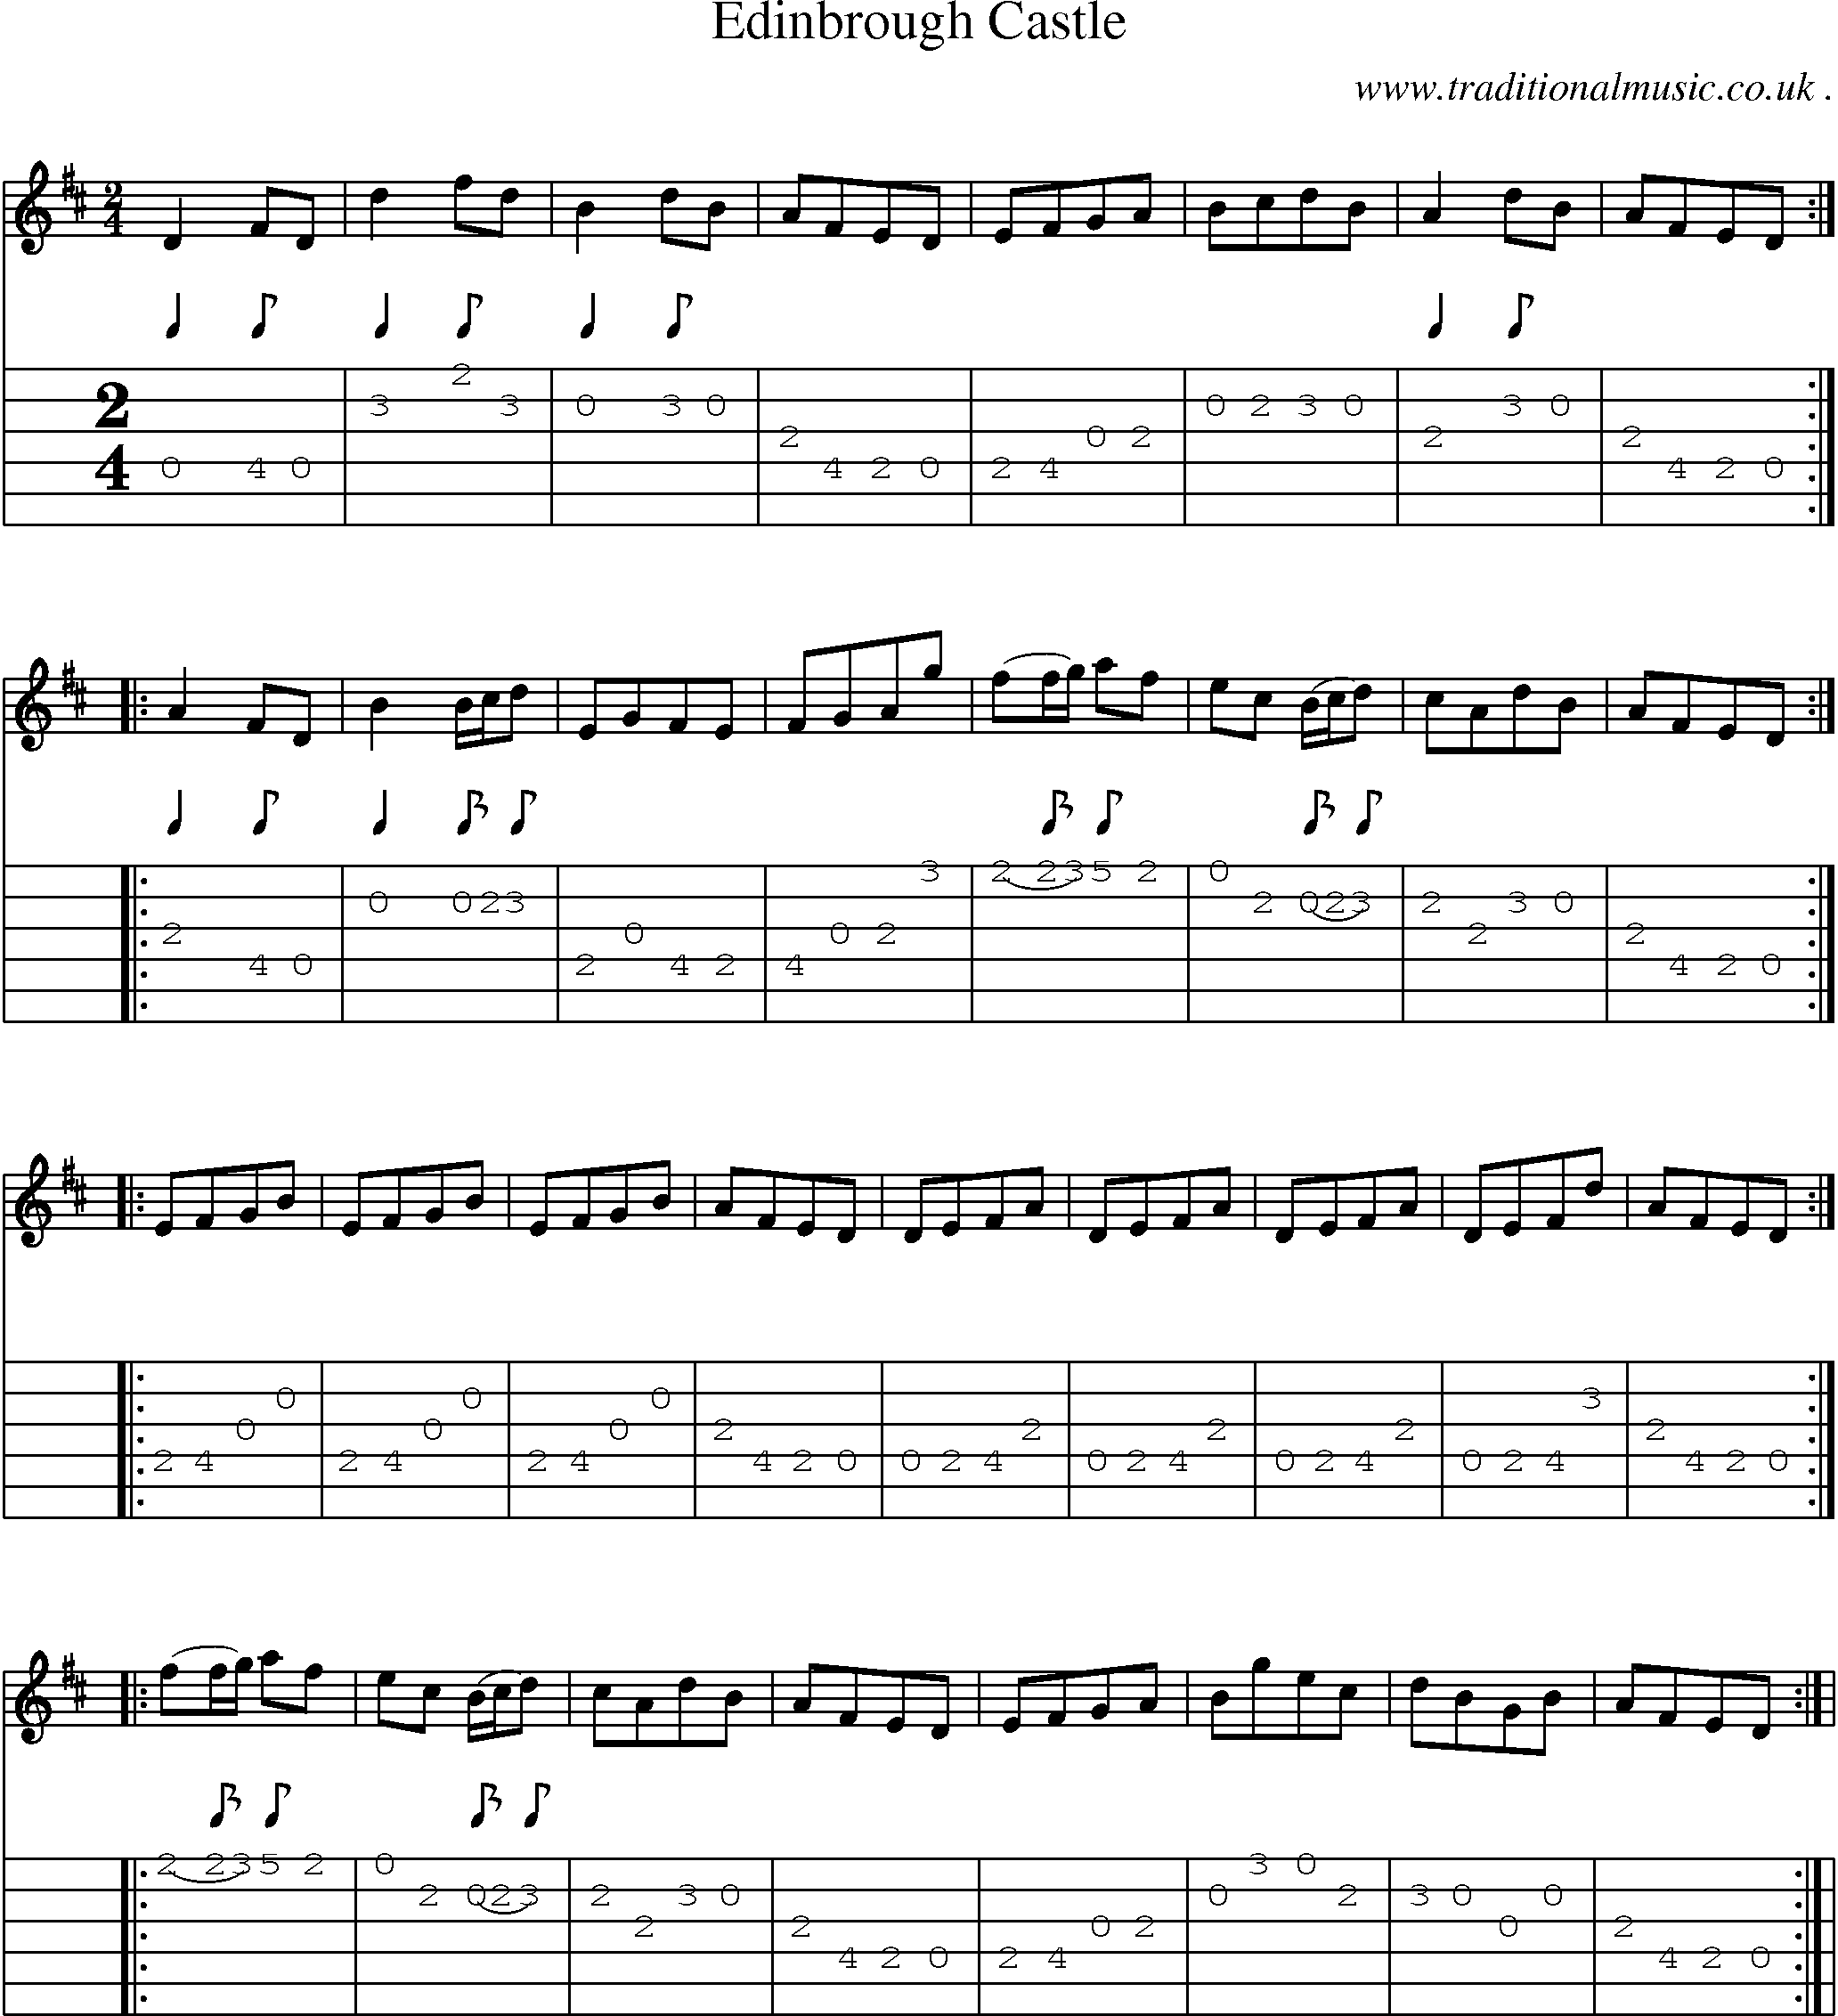 Sheet-Music and Guitar Tabs for Edinbrough Castle